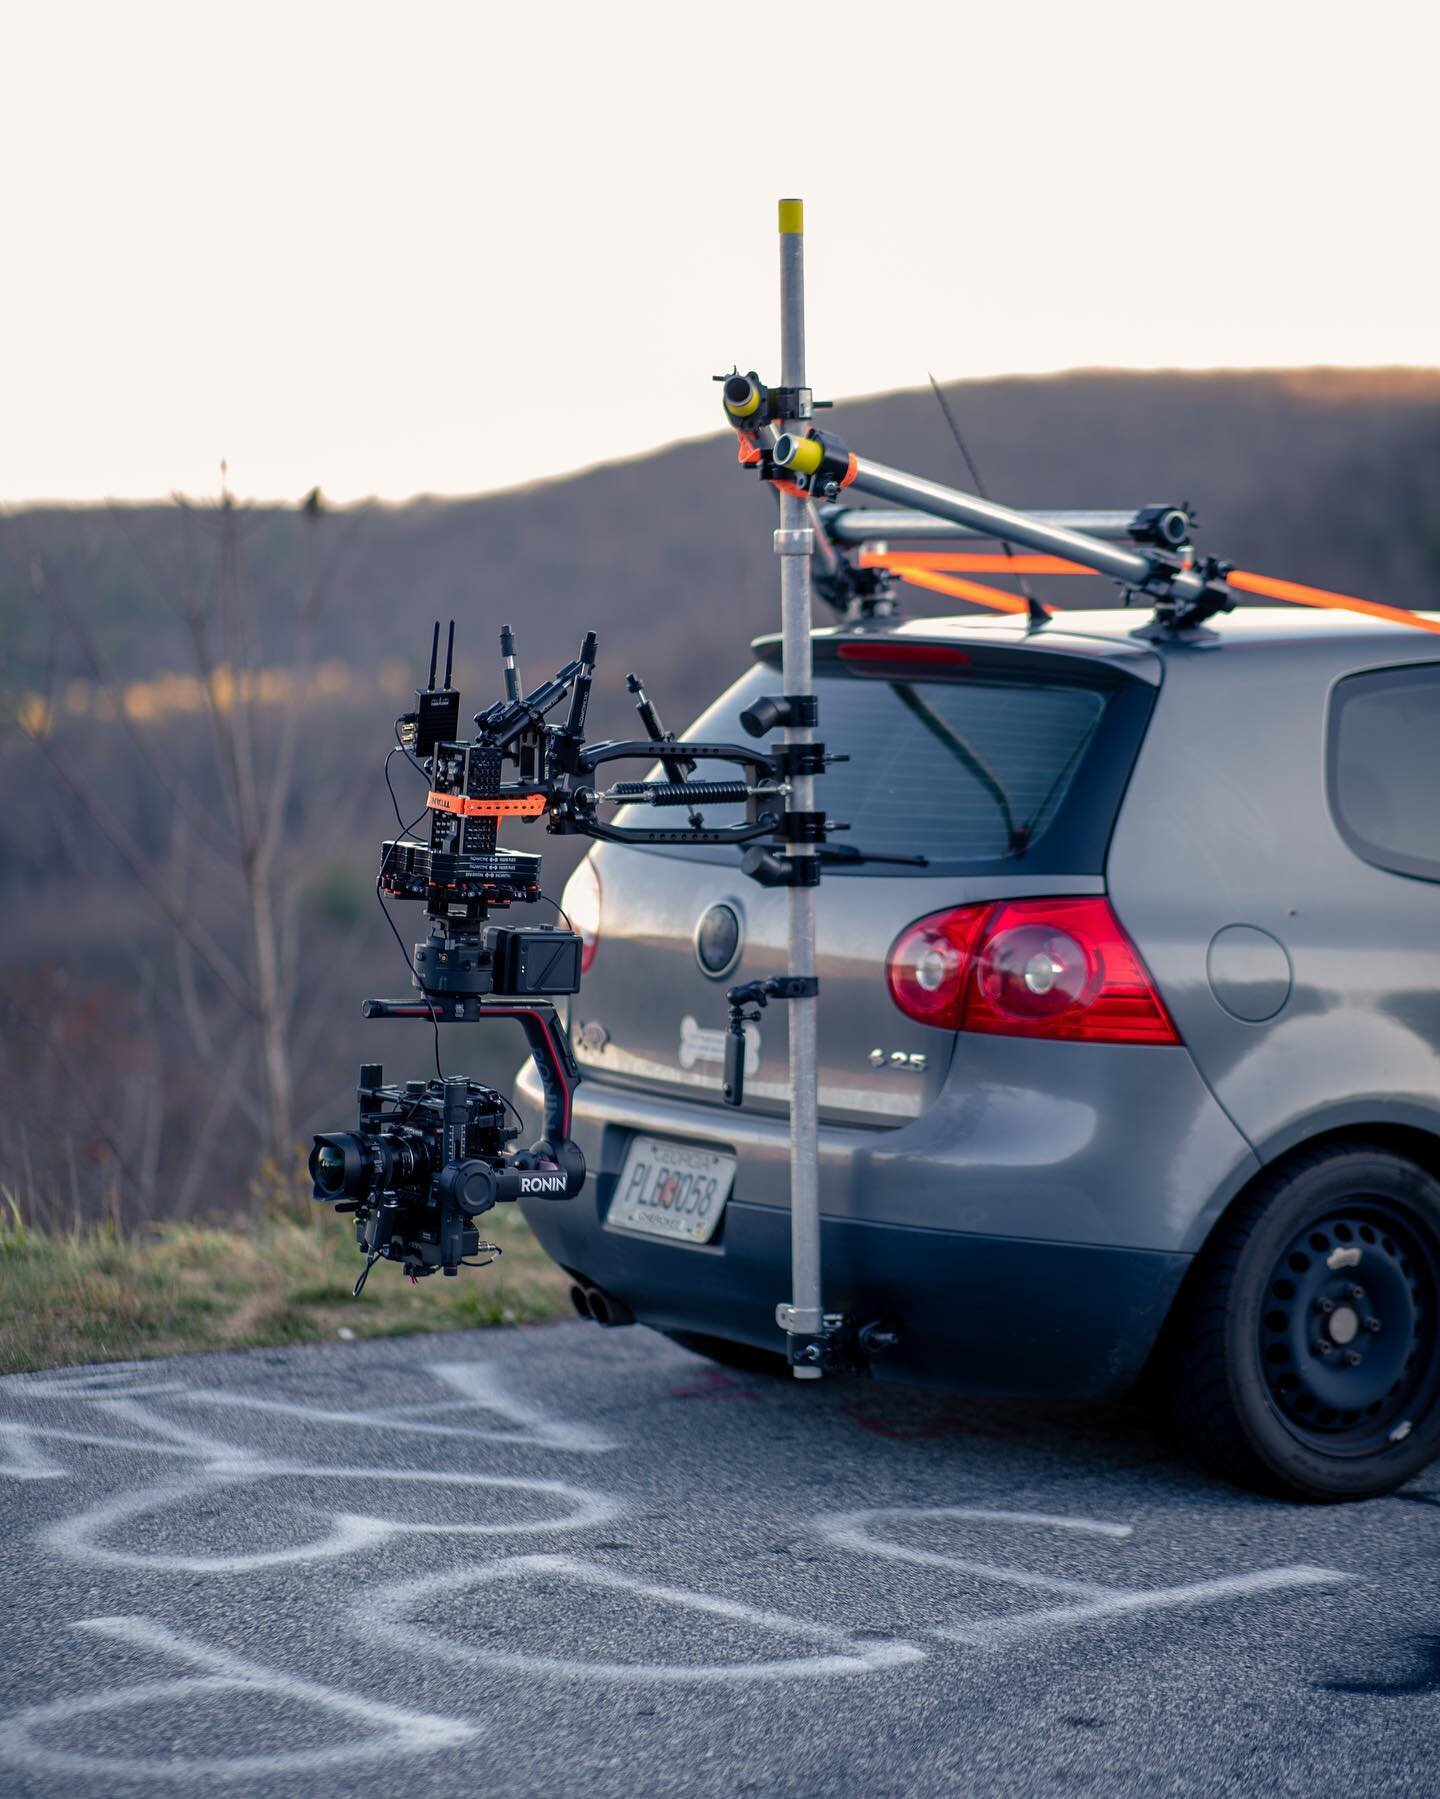 Having our follow car rig attached to a vehicle that could really maneuver through the mountains was really eye opening. The Robin 2 + Blackarm setup had zero issue with the twist and turns. 
This is making the decision for a dedicated camera car har